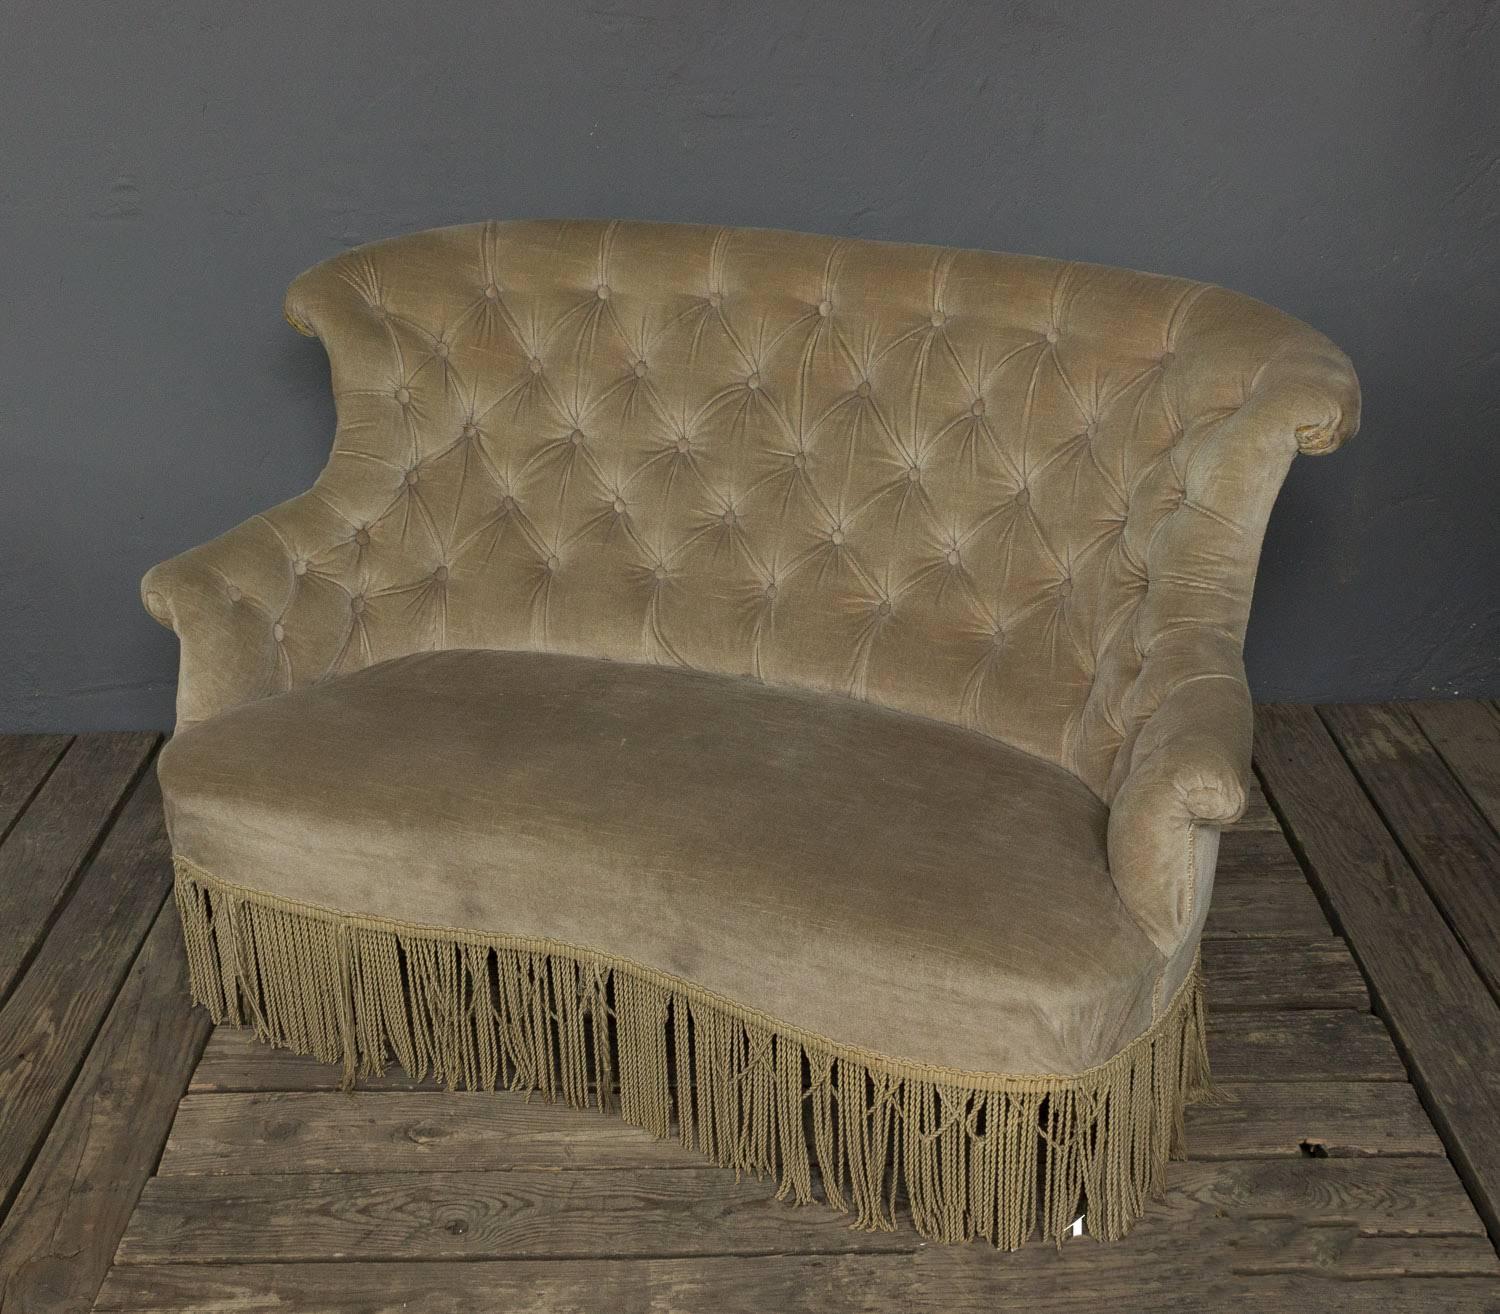 Originally part of a three-piece salon set, this wonderful tufted settee has a gracious scrolled back and rolled arms. The velvet has faded over the years to a warm sage green tone. Sold as is.